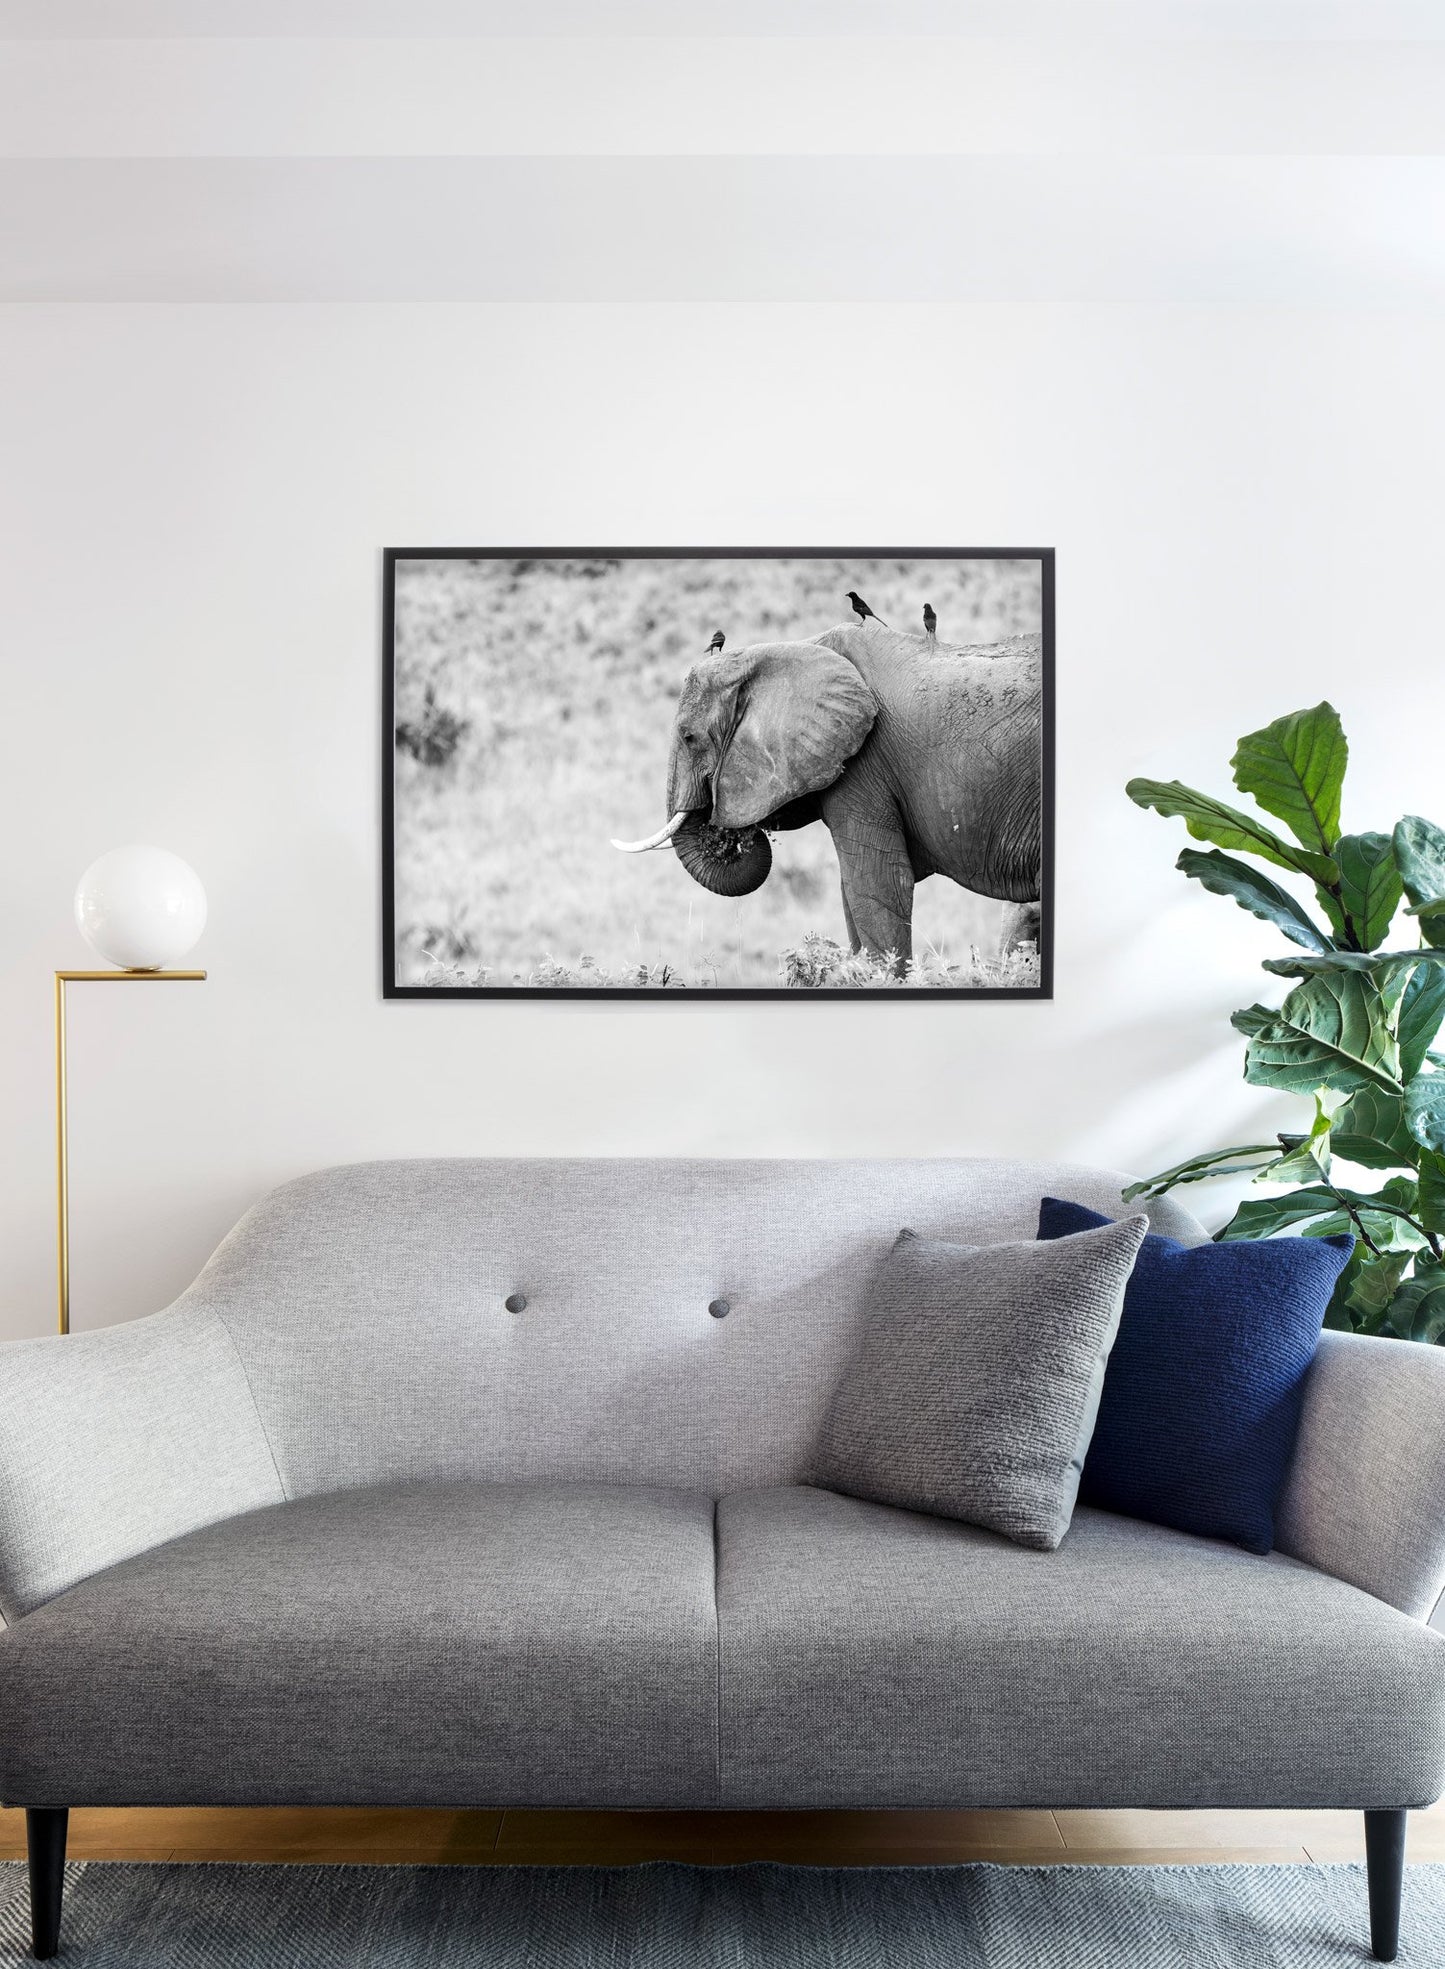 Black and white elephant modern minimalist photography poster by Opposite Wall - Gallery Wall - Cozy living room